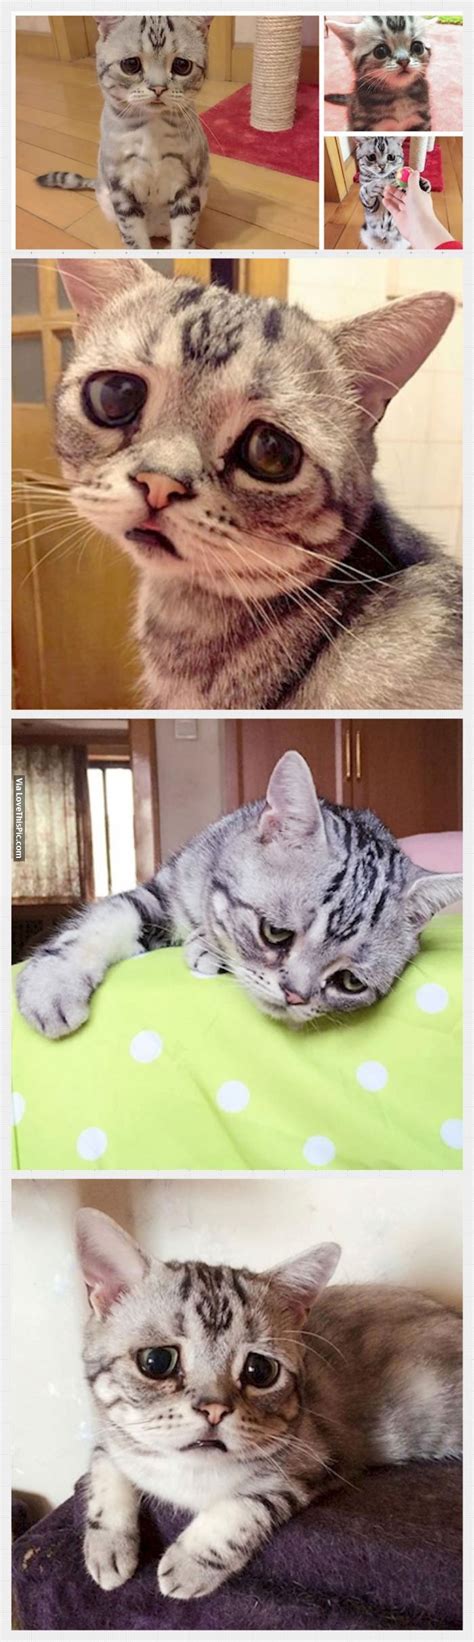 Meet Luhu The Saddest Cat In The World Pictures Photos And Images